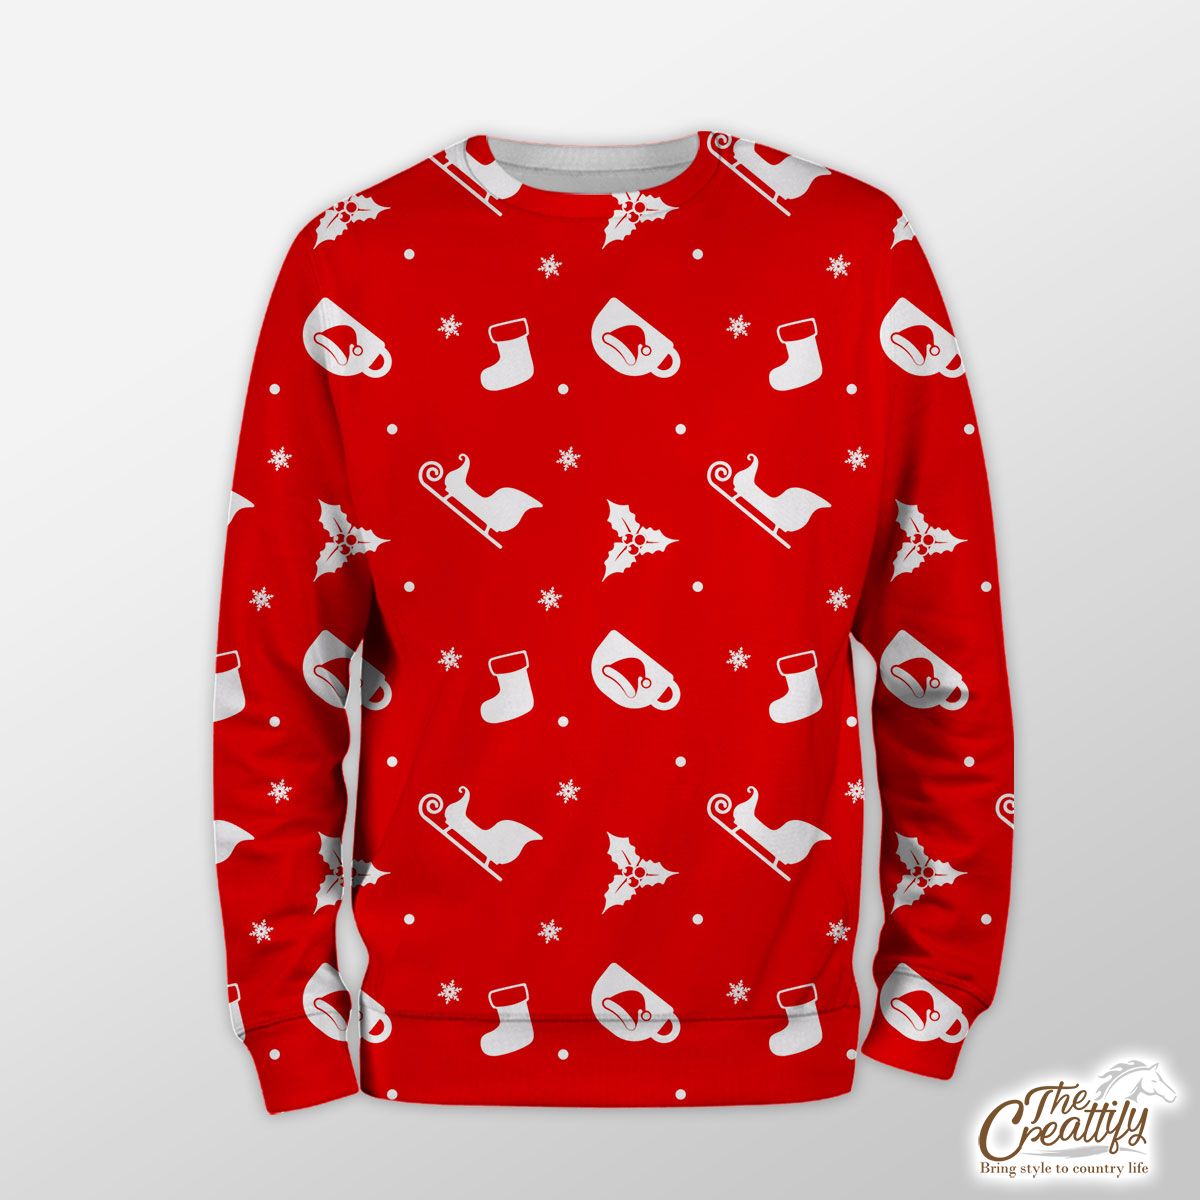 Red And White Santa Sleigh, Holly Leaf With Snowflake Sweatshirt